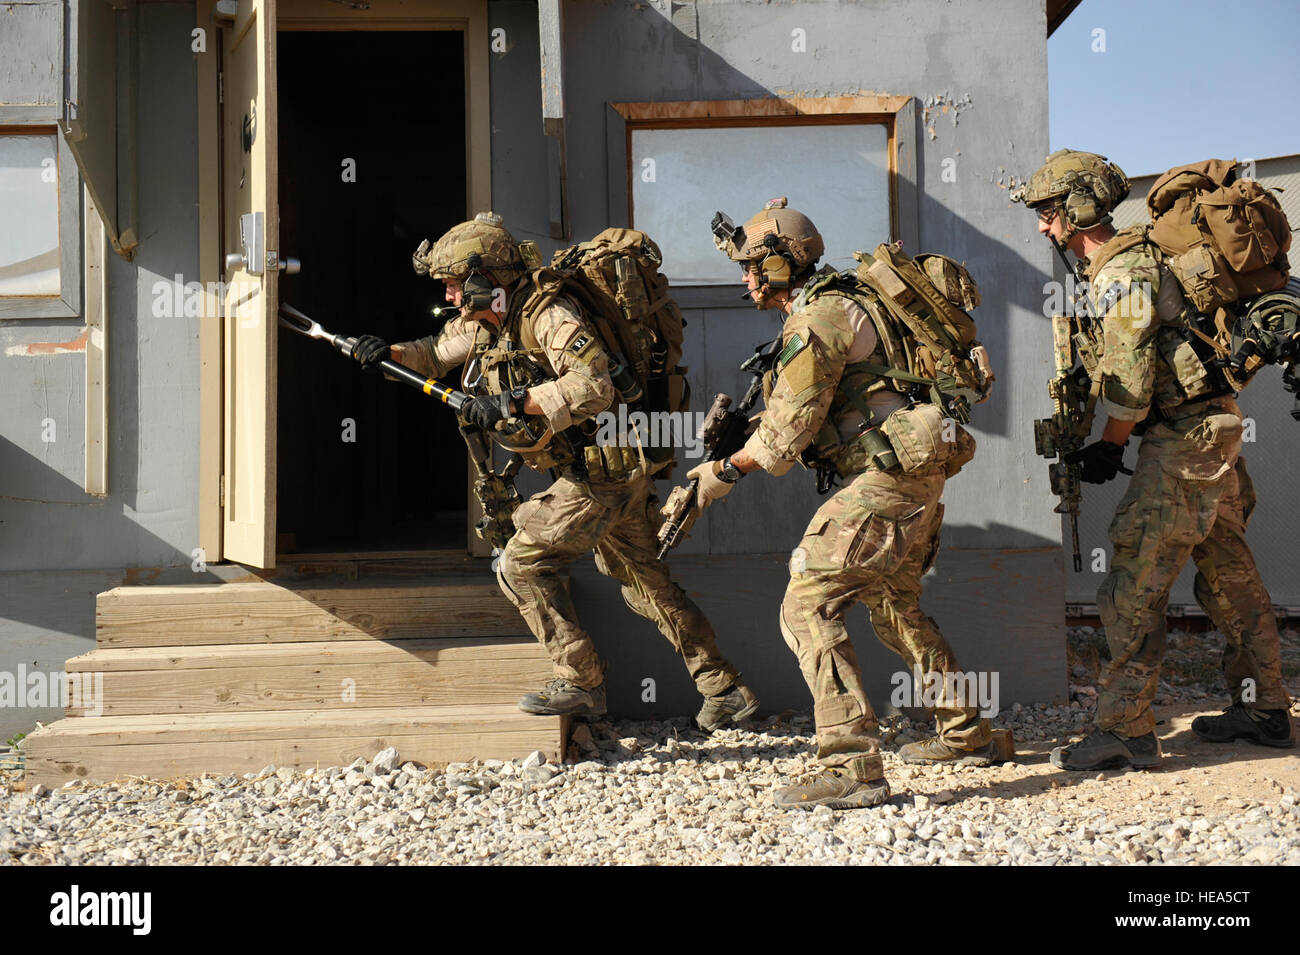 BAGRAM AIRFIELD, Afghanistan – U.S. Air Force Senior Airman Joseph Brady (left), Staff Sgt. Jason Lee (center), and Senior Airman Thomas Schalin breach a door and prepare to clear a room during a mission rehearsal in an excess structure here Aug. 26, 2014. The event allowed pararescuemen from the 83rd Expeditionary Rescue Squadron, to hone their breaching, clearing, patient care, and egress skills. Air Force rescue forces conduct combat search and rescue and personnel recovery operations. Brady and Schalin are deployed from Davis-Monthan AFB, Ariz., and Lee is an Air National Guardsmen deploye Stock Photo